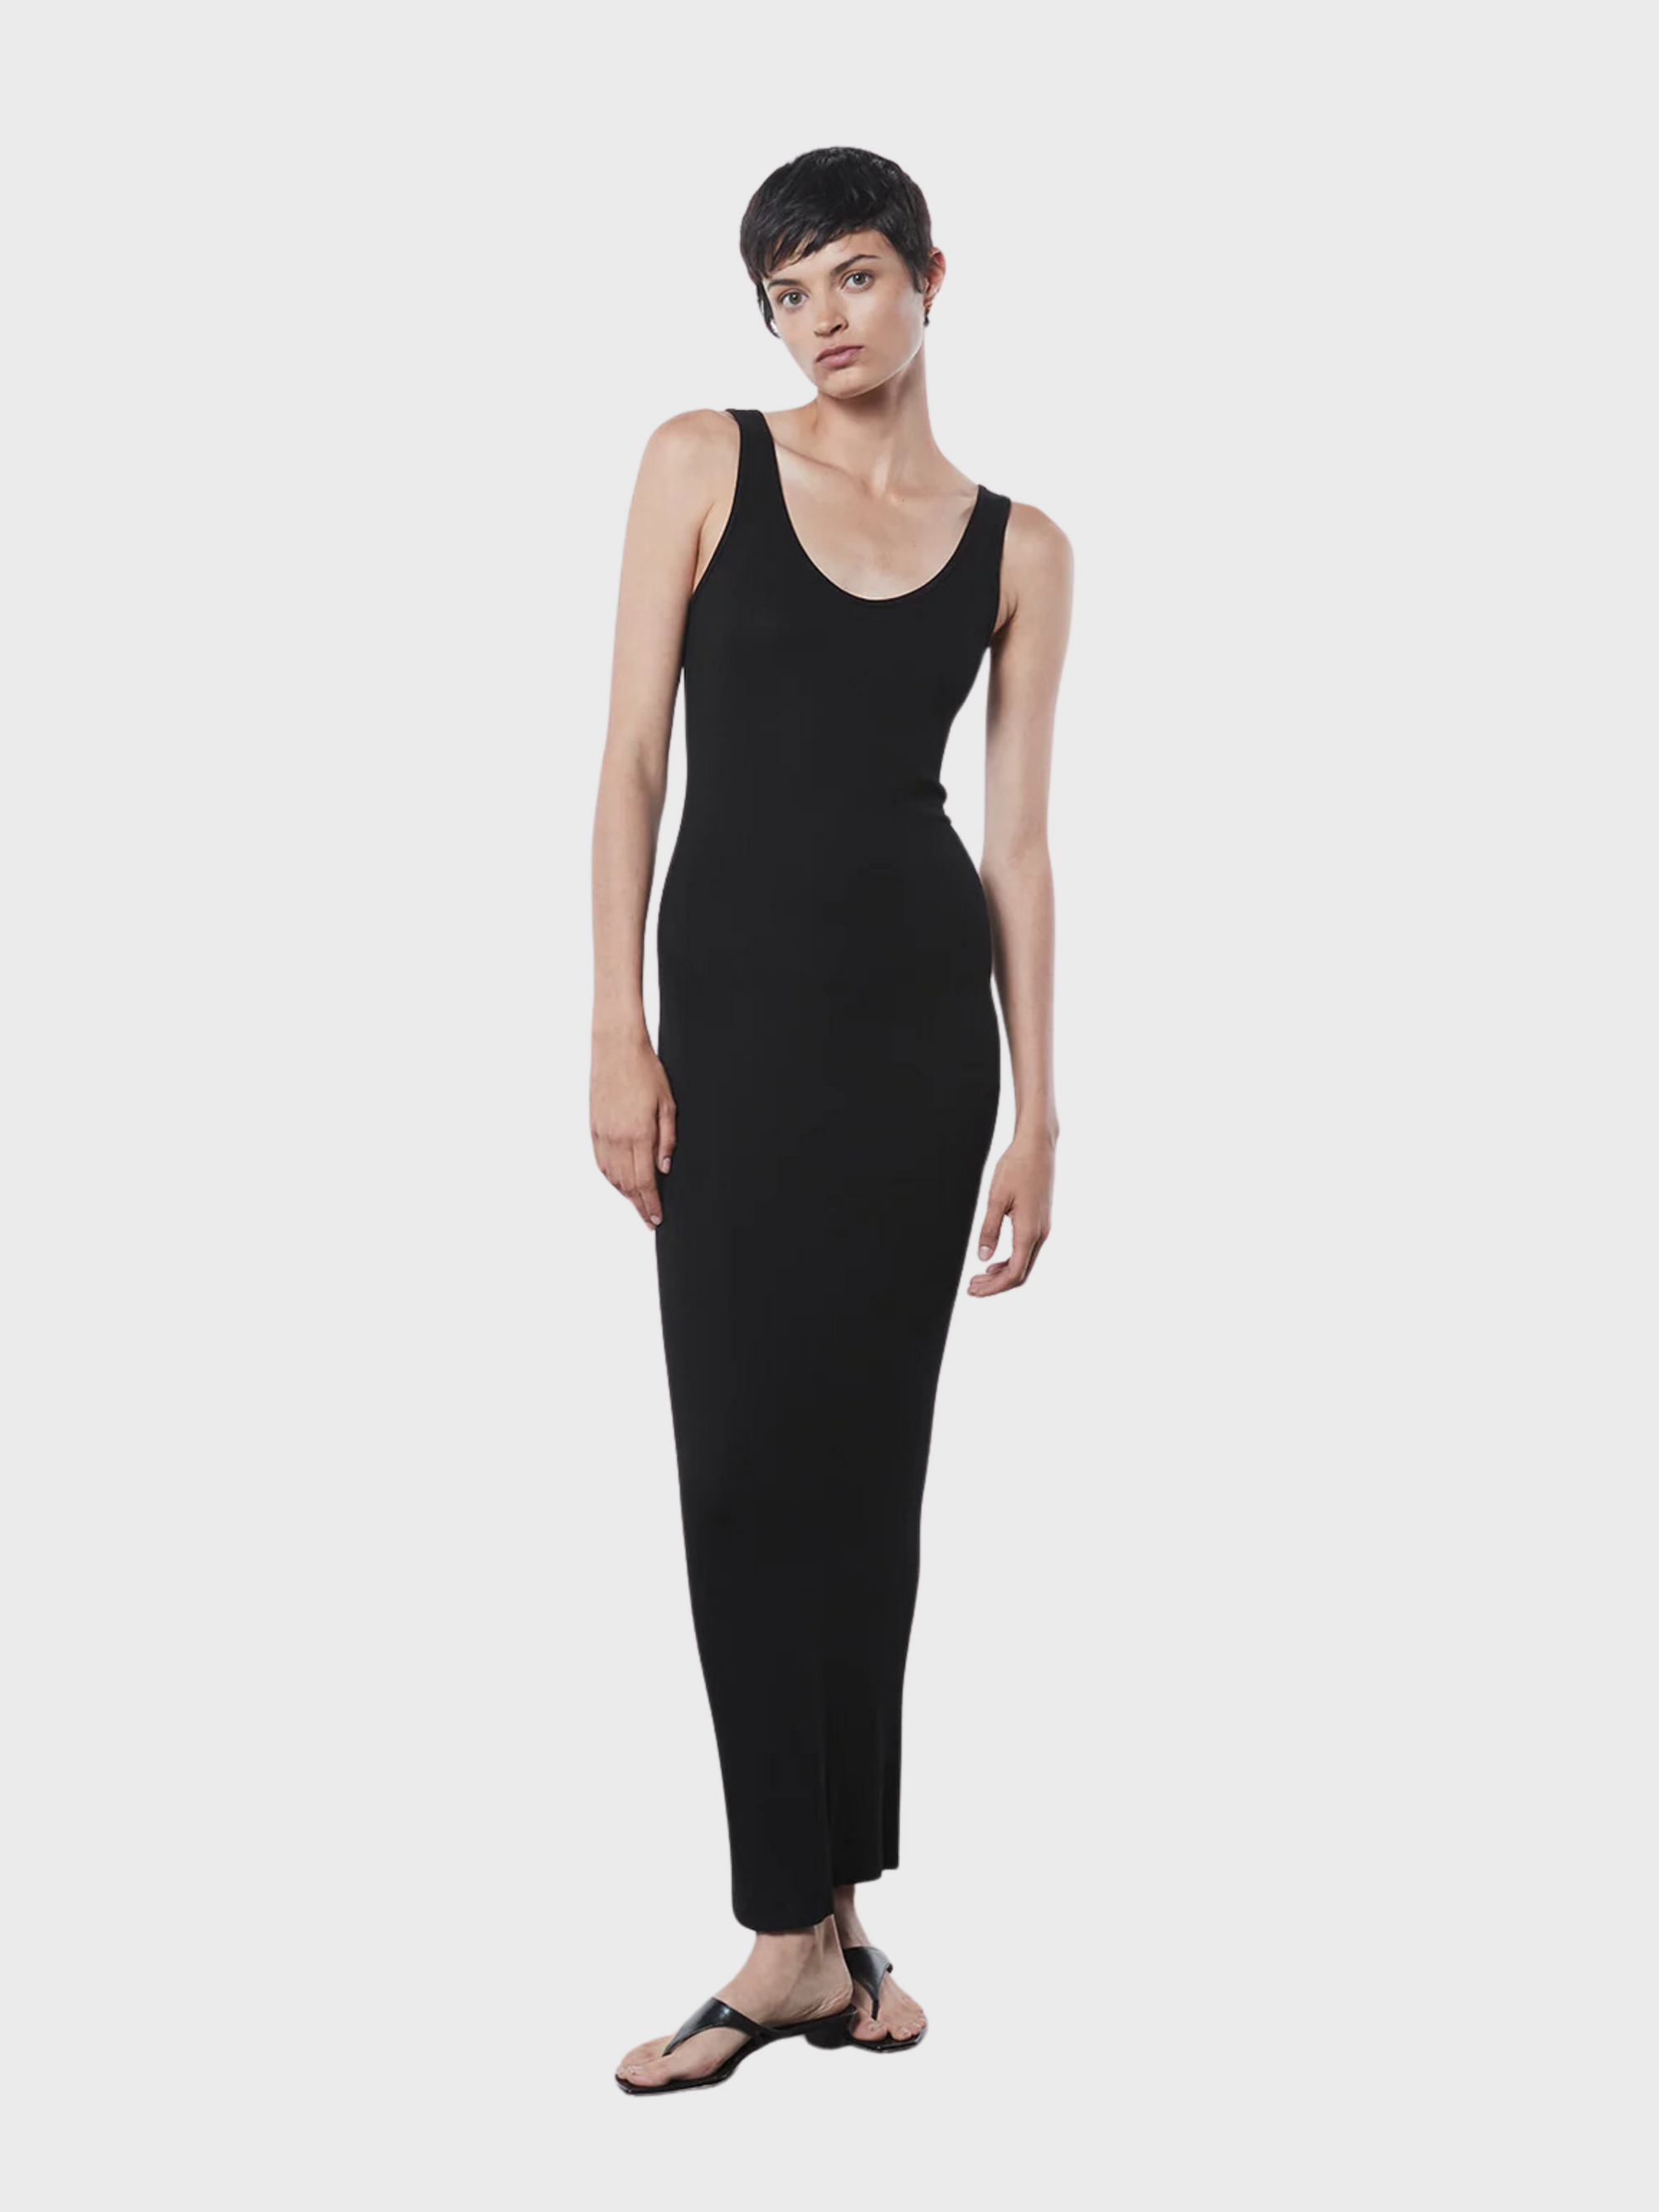 Enza Costa Stretch Silk Knit Maxi Tank Dress Black-Dresses-XS-West of Woodward Boutique-Vancouver-Canada